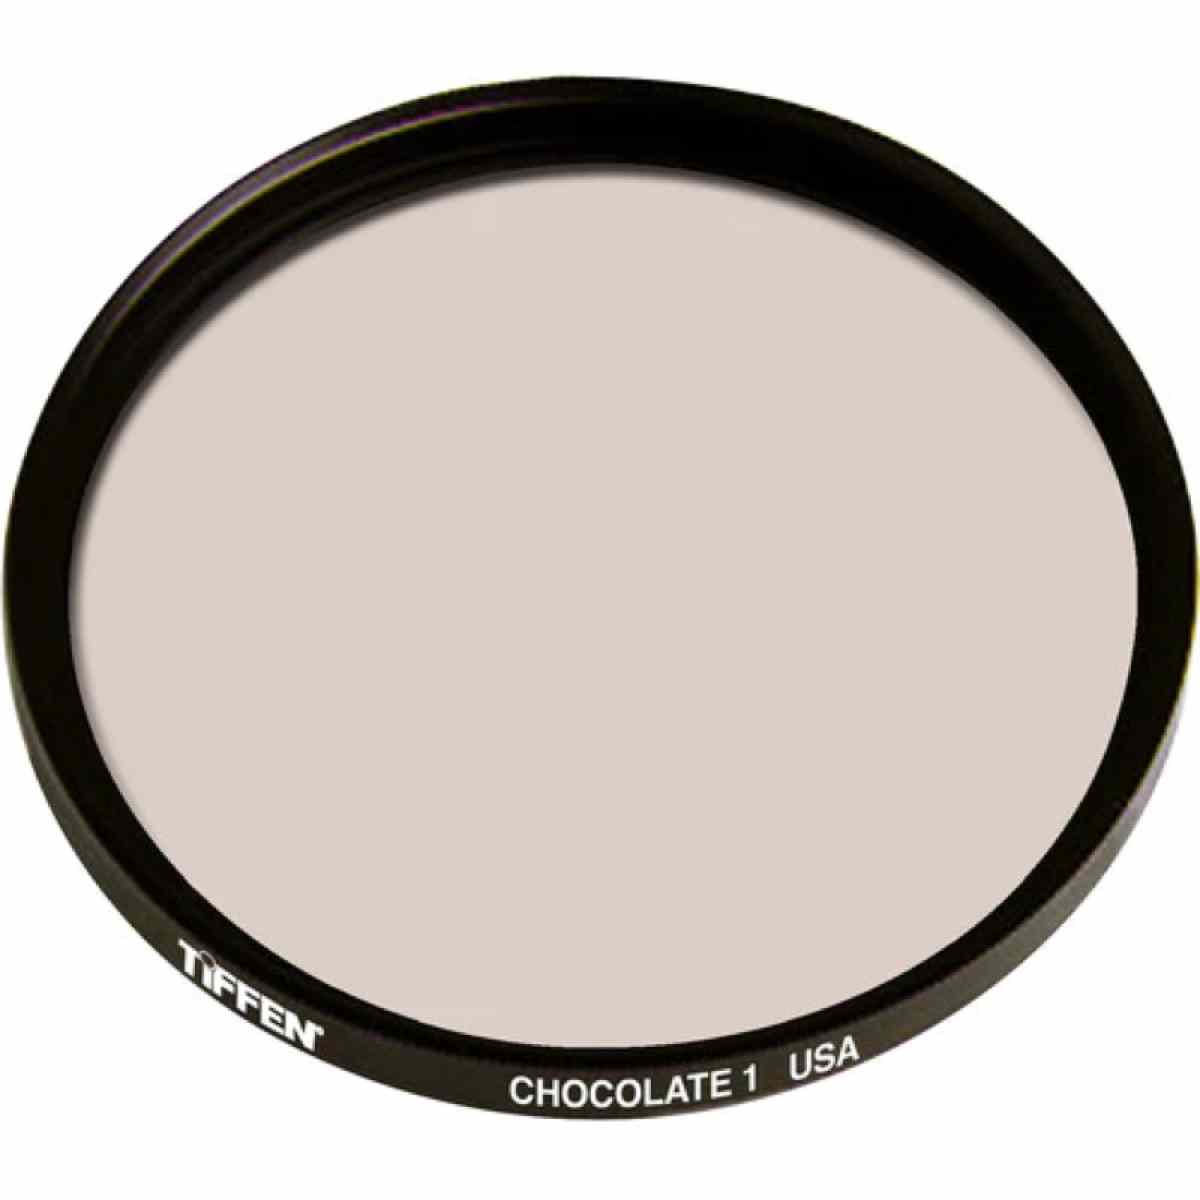 Tiffen 77MM Chocolate 1 - special order